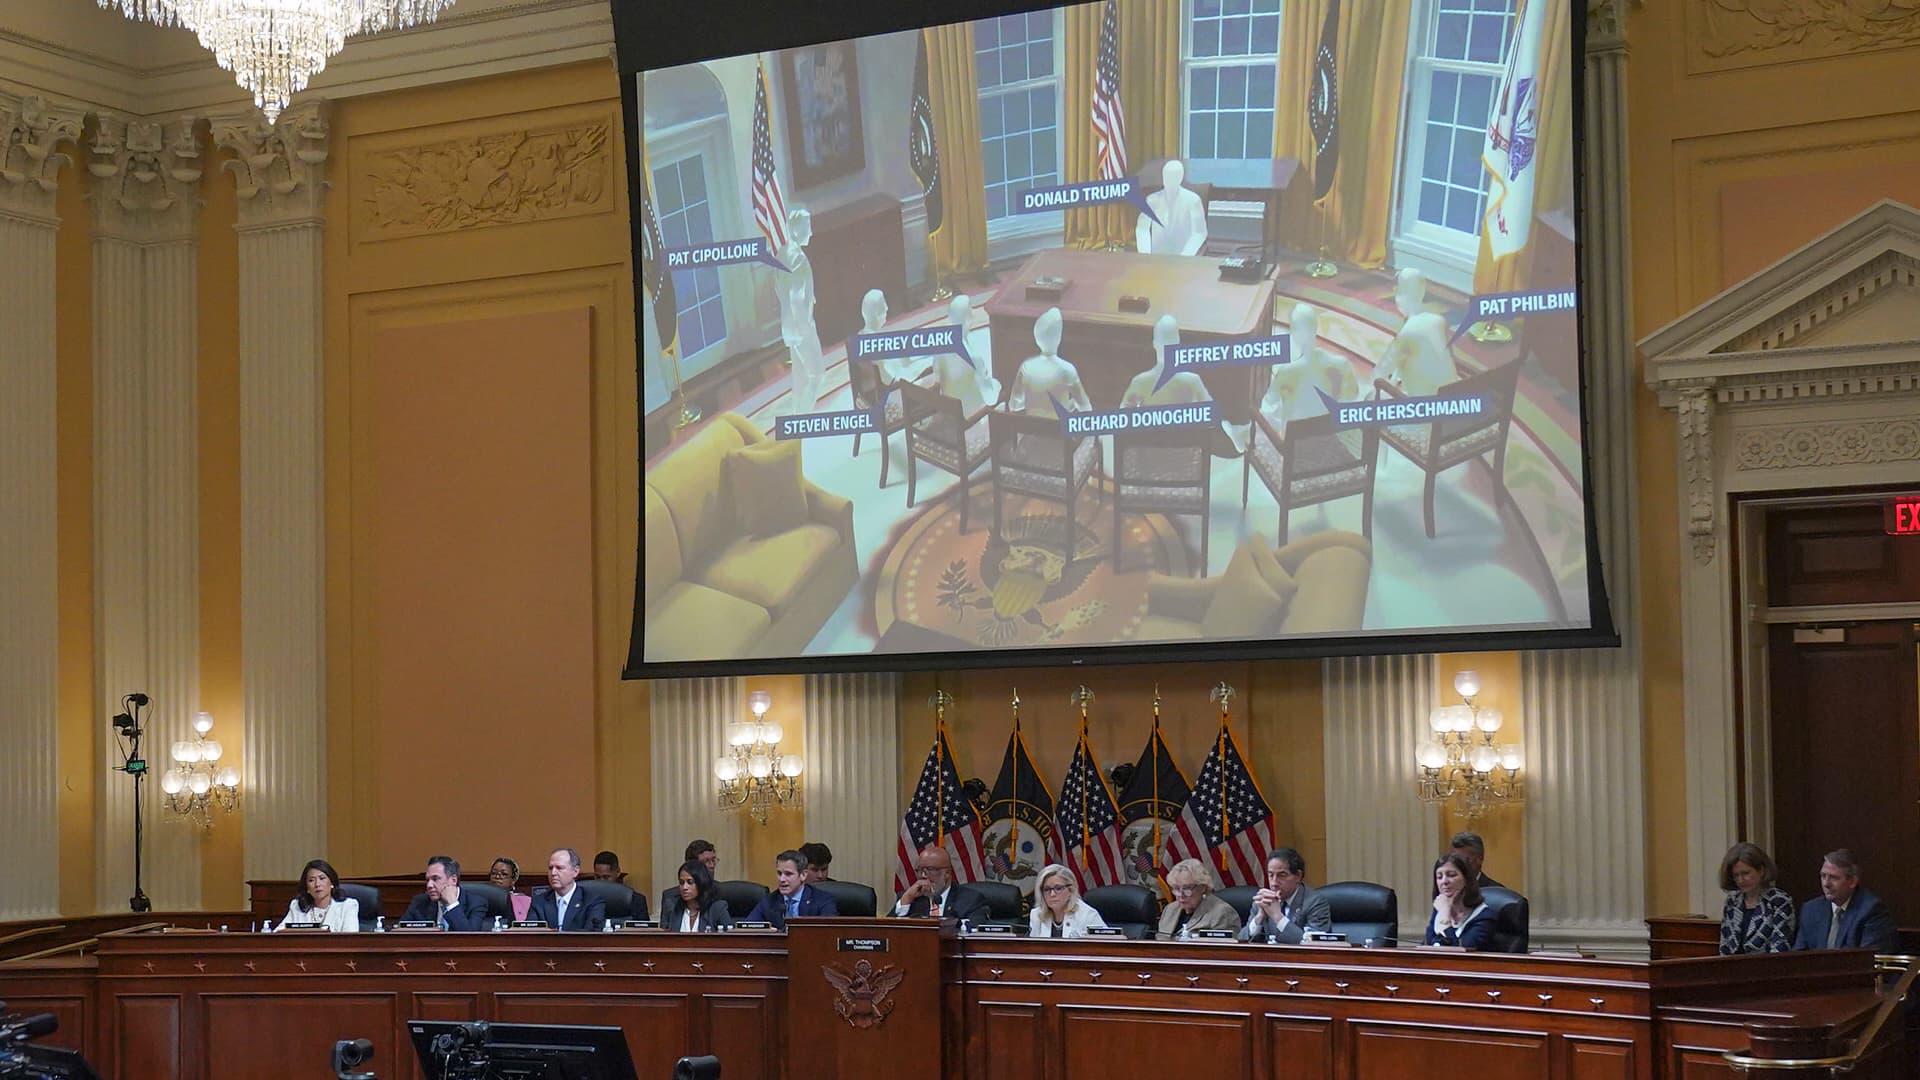 An animated recreation of a meeting between former president Donald Trump, Pat Cipollone, Steven Engel, Jeffery Clark, Richard Donoghue, Jeffery Rosen, Eric Herschmann and Pat Philbin is shown on a screen during the fifth hearing held by the Select Committee to Investigate the January 6th Attack on the U.S. Capitol on June 23, 2022 in the Cannon House Office Building in Washington, DC. The bipartisan committee, which has been gathering evidence related to the January 6, 2021 attack at the U.S. Capitol for almost a year, is presenting its findings in a series of televised hearings. On January 6, 2021, supporters of President Donald Trump attacked the U.S. Capitol Building in an attempt to disrupt a congressional vote to confirm the electoral college win for Joe Biden. (Photo by Demetrius Freeman-Pool/Getty Images)